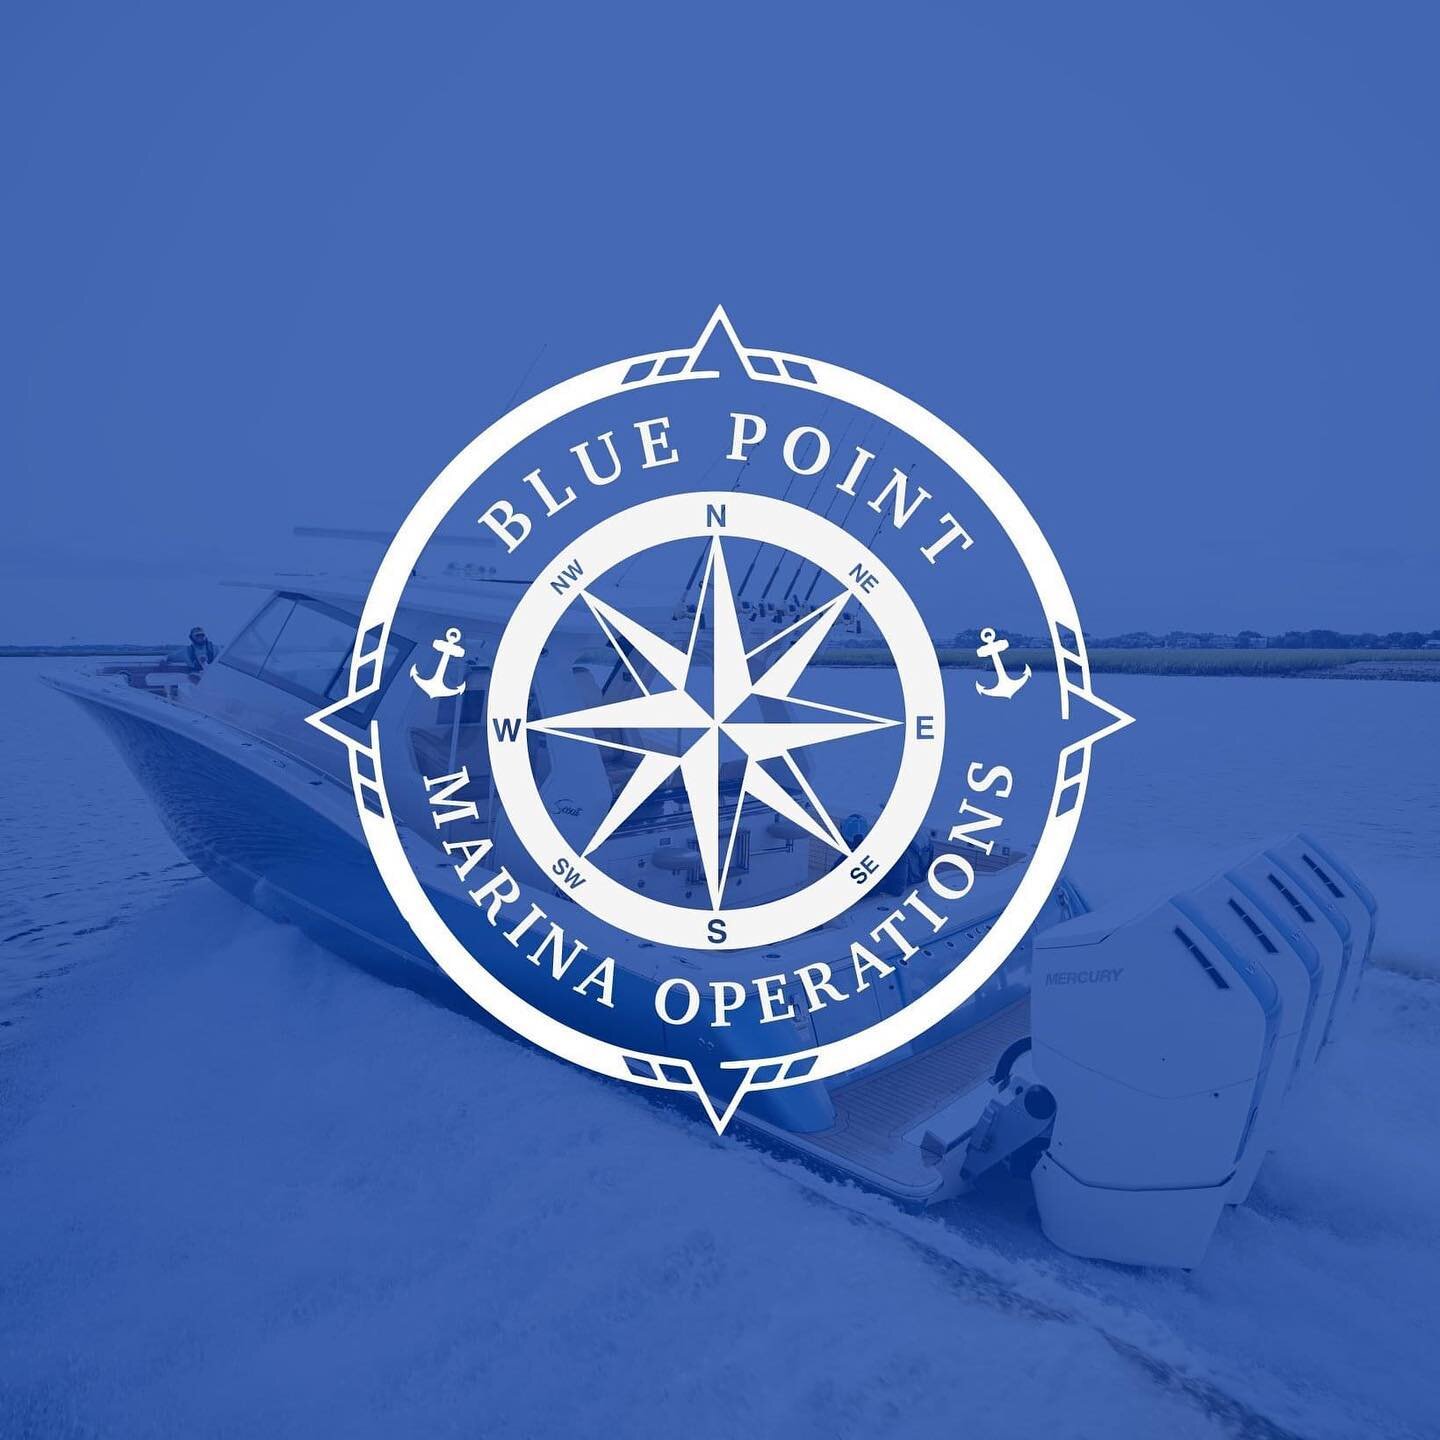 Logo Design Services ✏️

We created this logo design for Blue Point Marina Operations in Blue Point. The new owners wanted to create a brand new identity with a fresh new look and feel. ⚓️

How do you think we did?

#logodesign #logodesigner #logodes